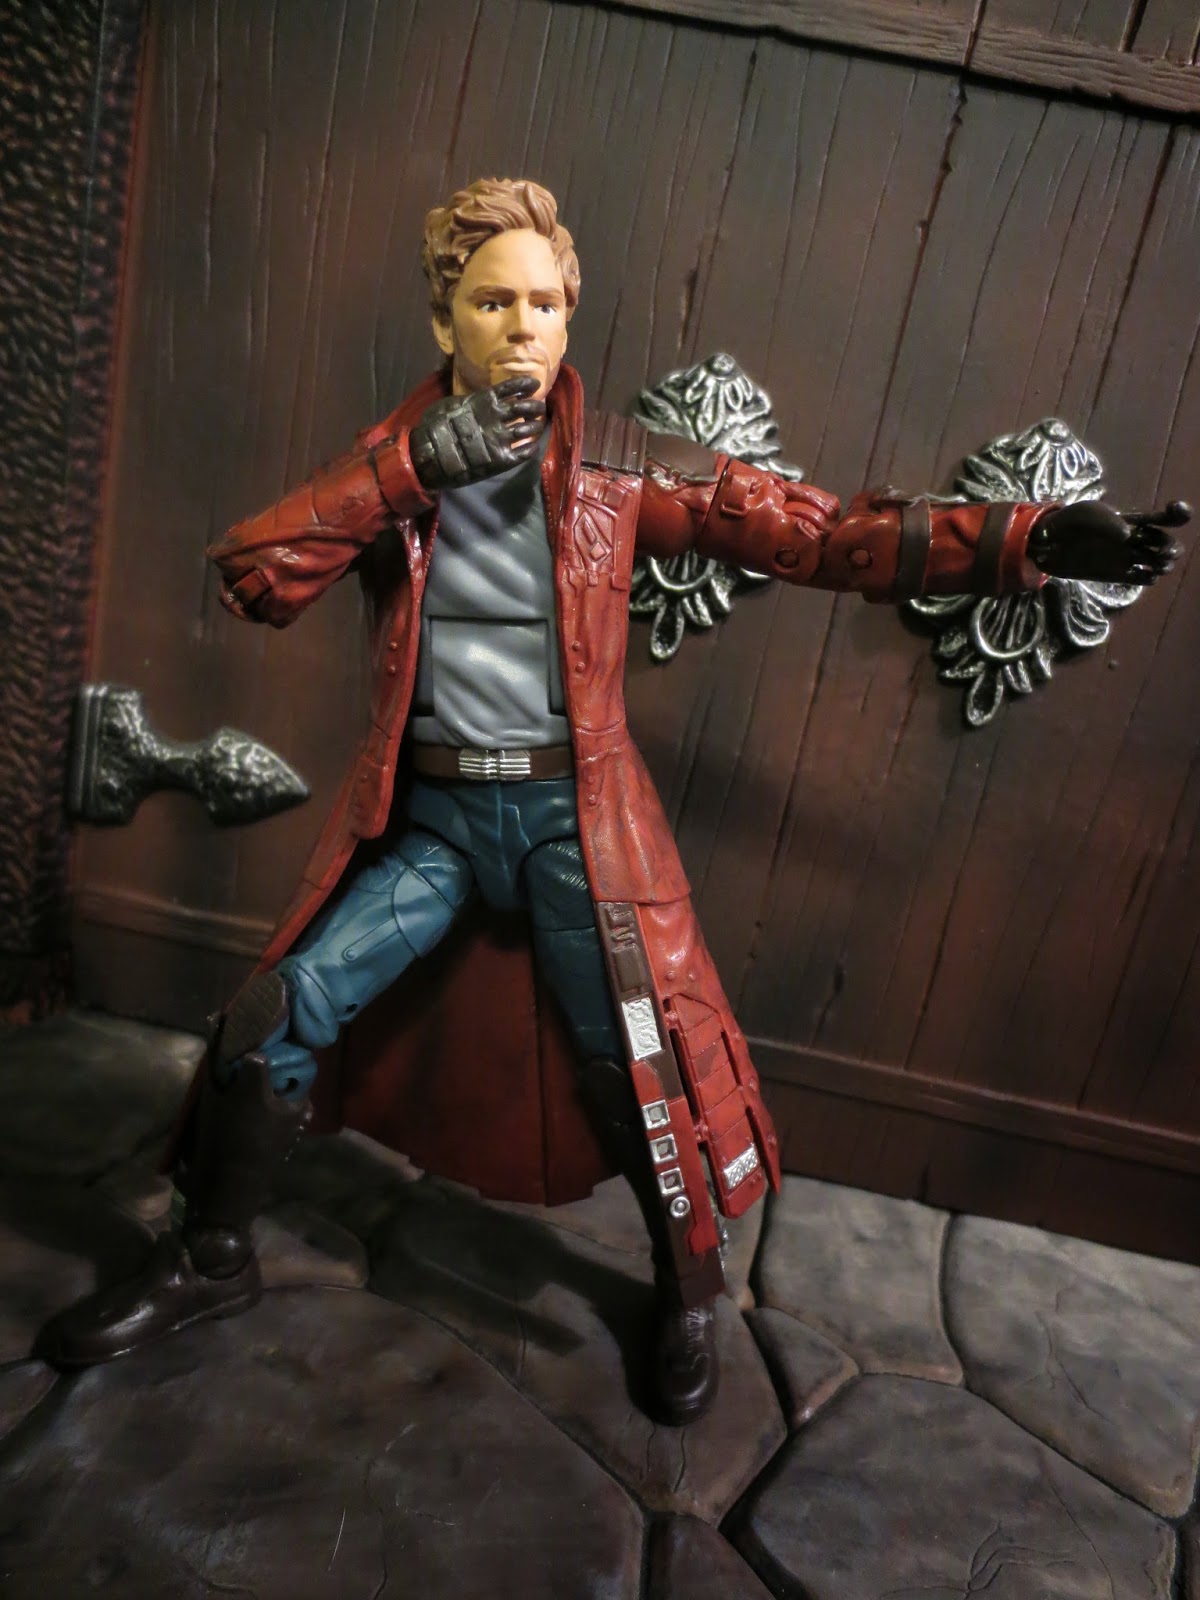 Action Figure Review: Star-Lord from Marvel Legends Infinite